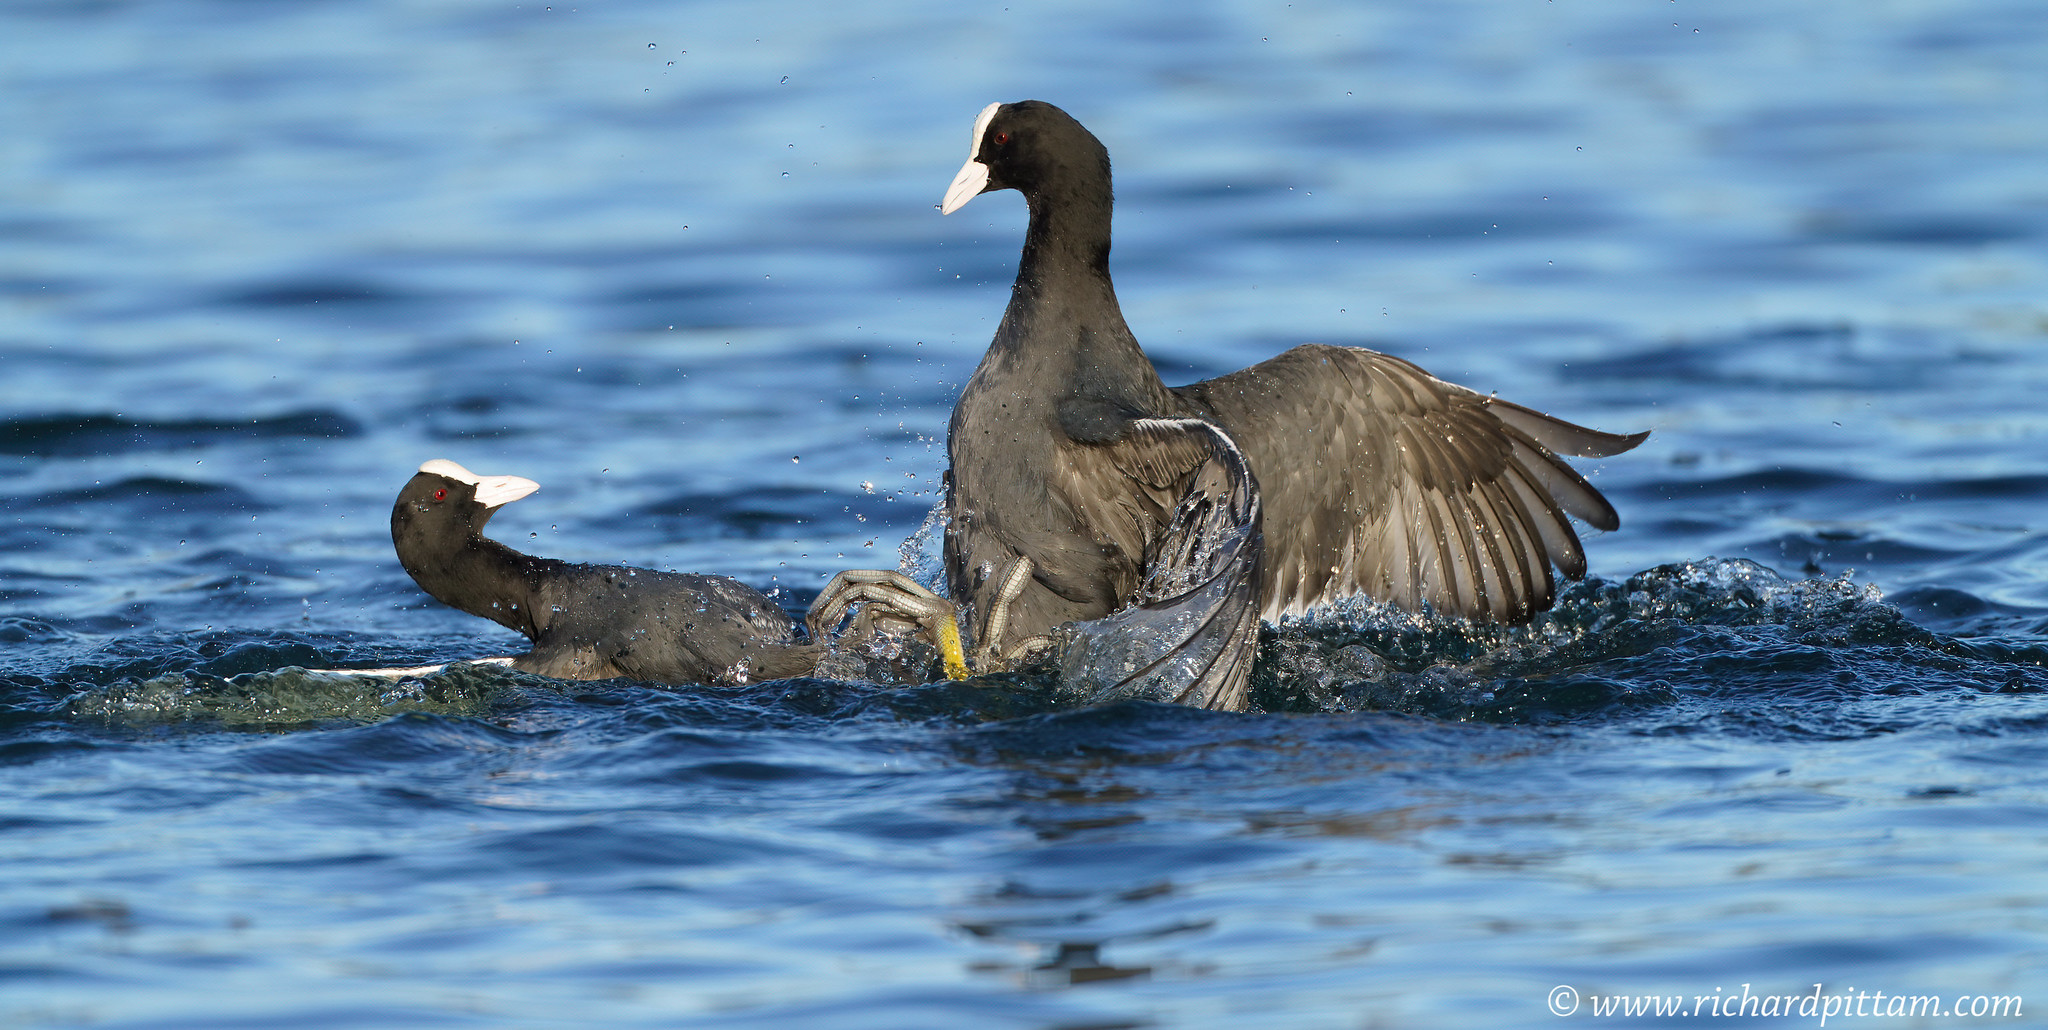 Everybody was Lockdown Fighting......Coot/s